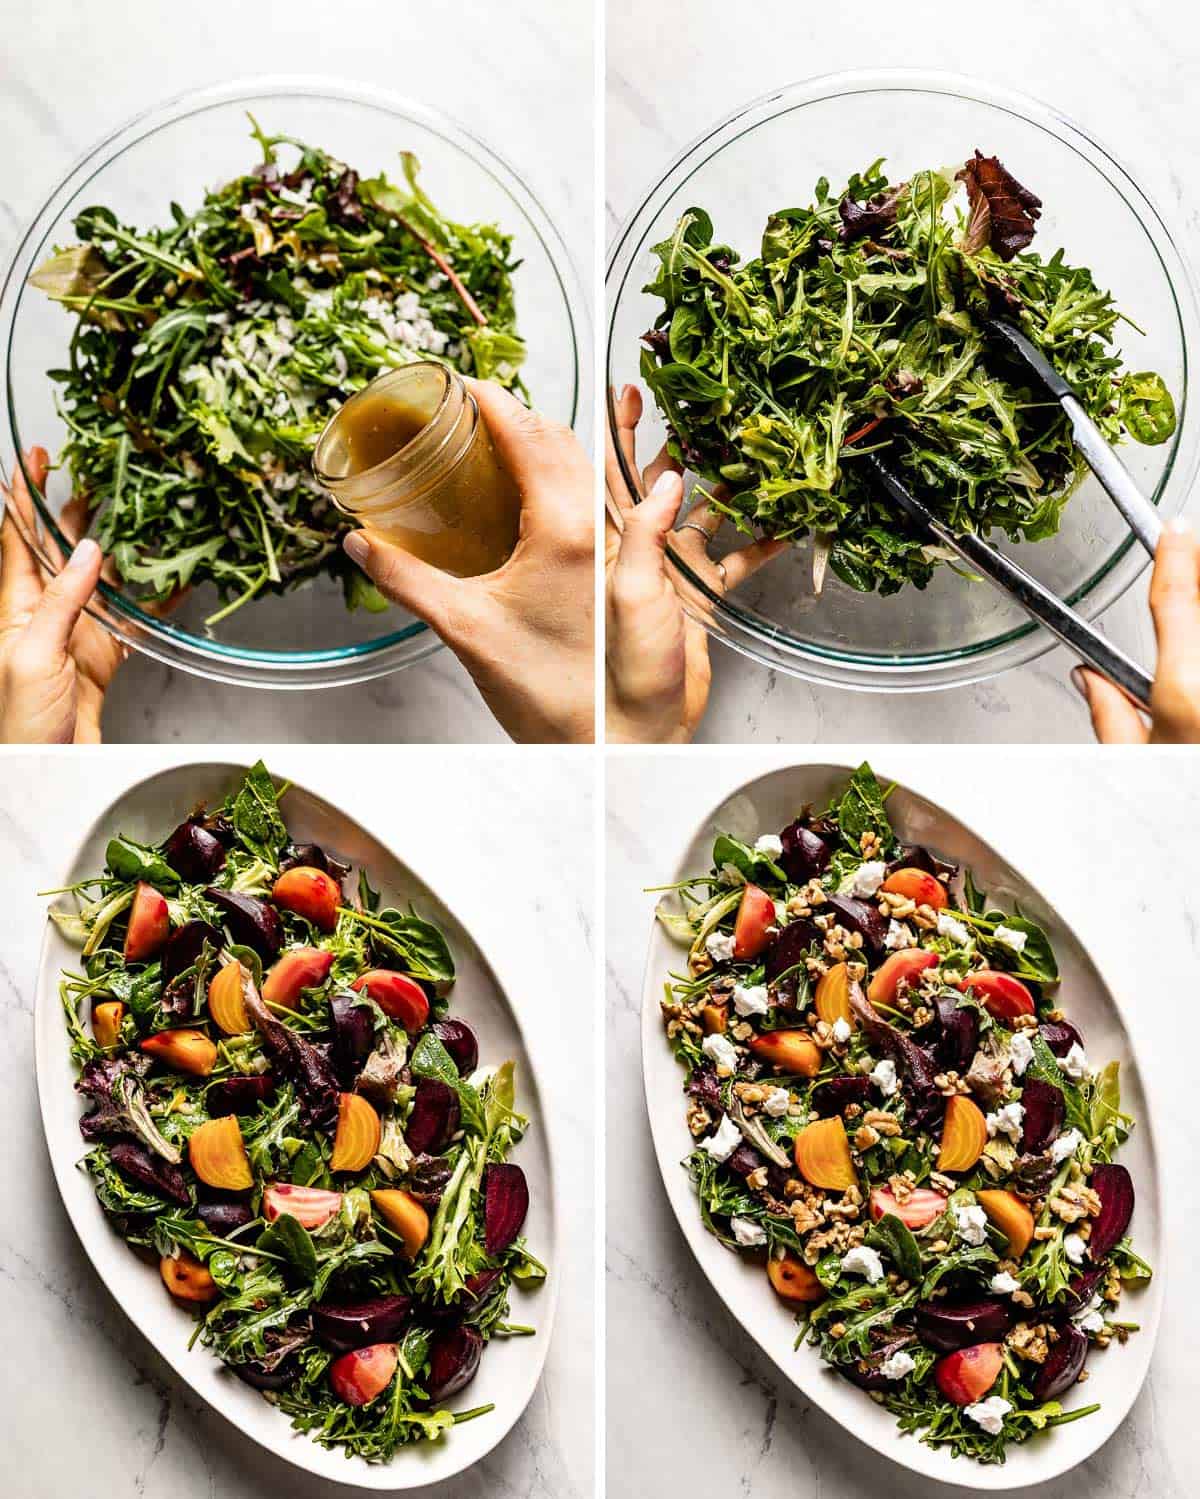 A person tossing greens in dressing and adding beets and cheese to the salad. 